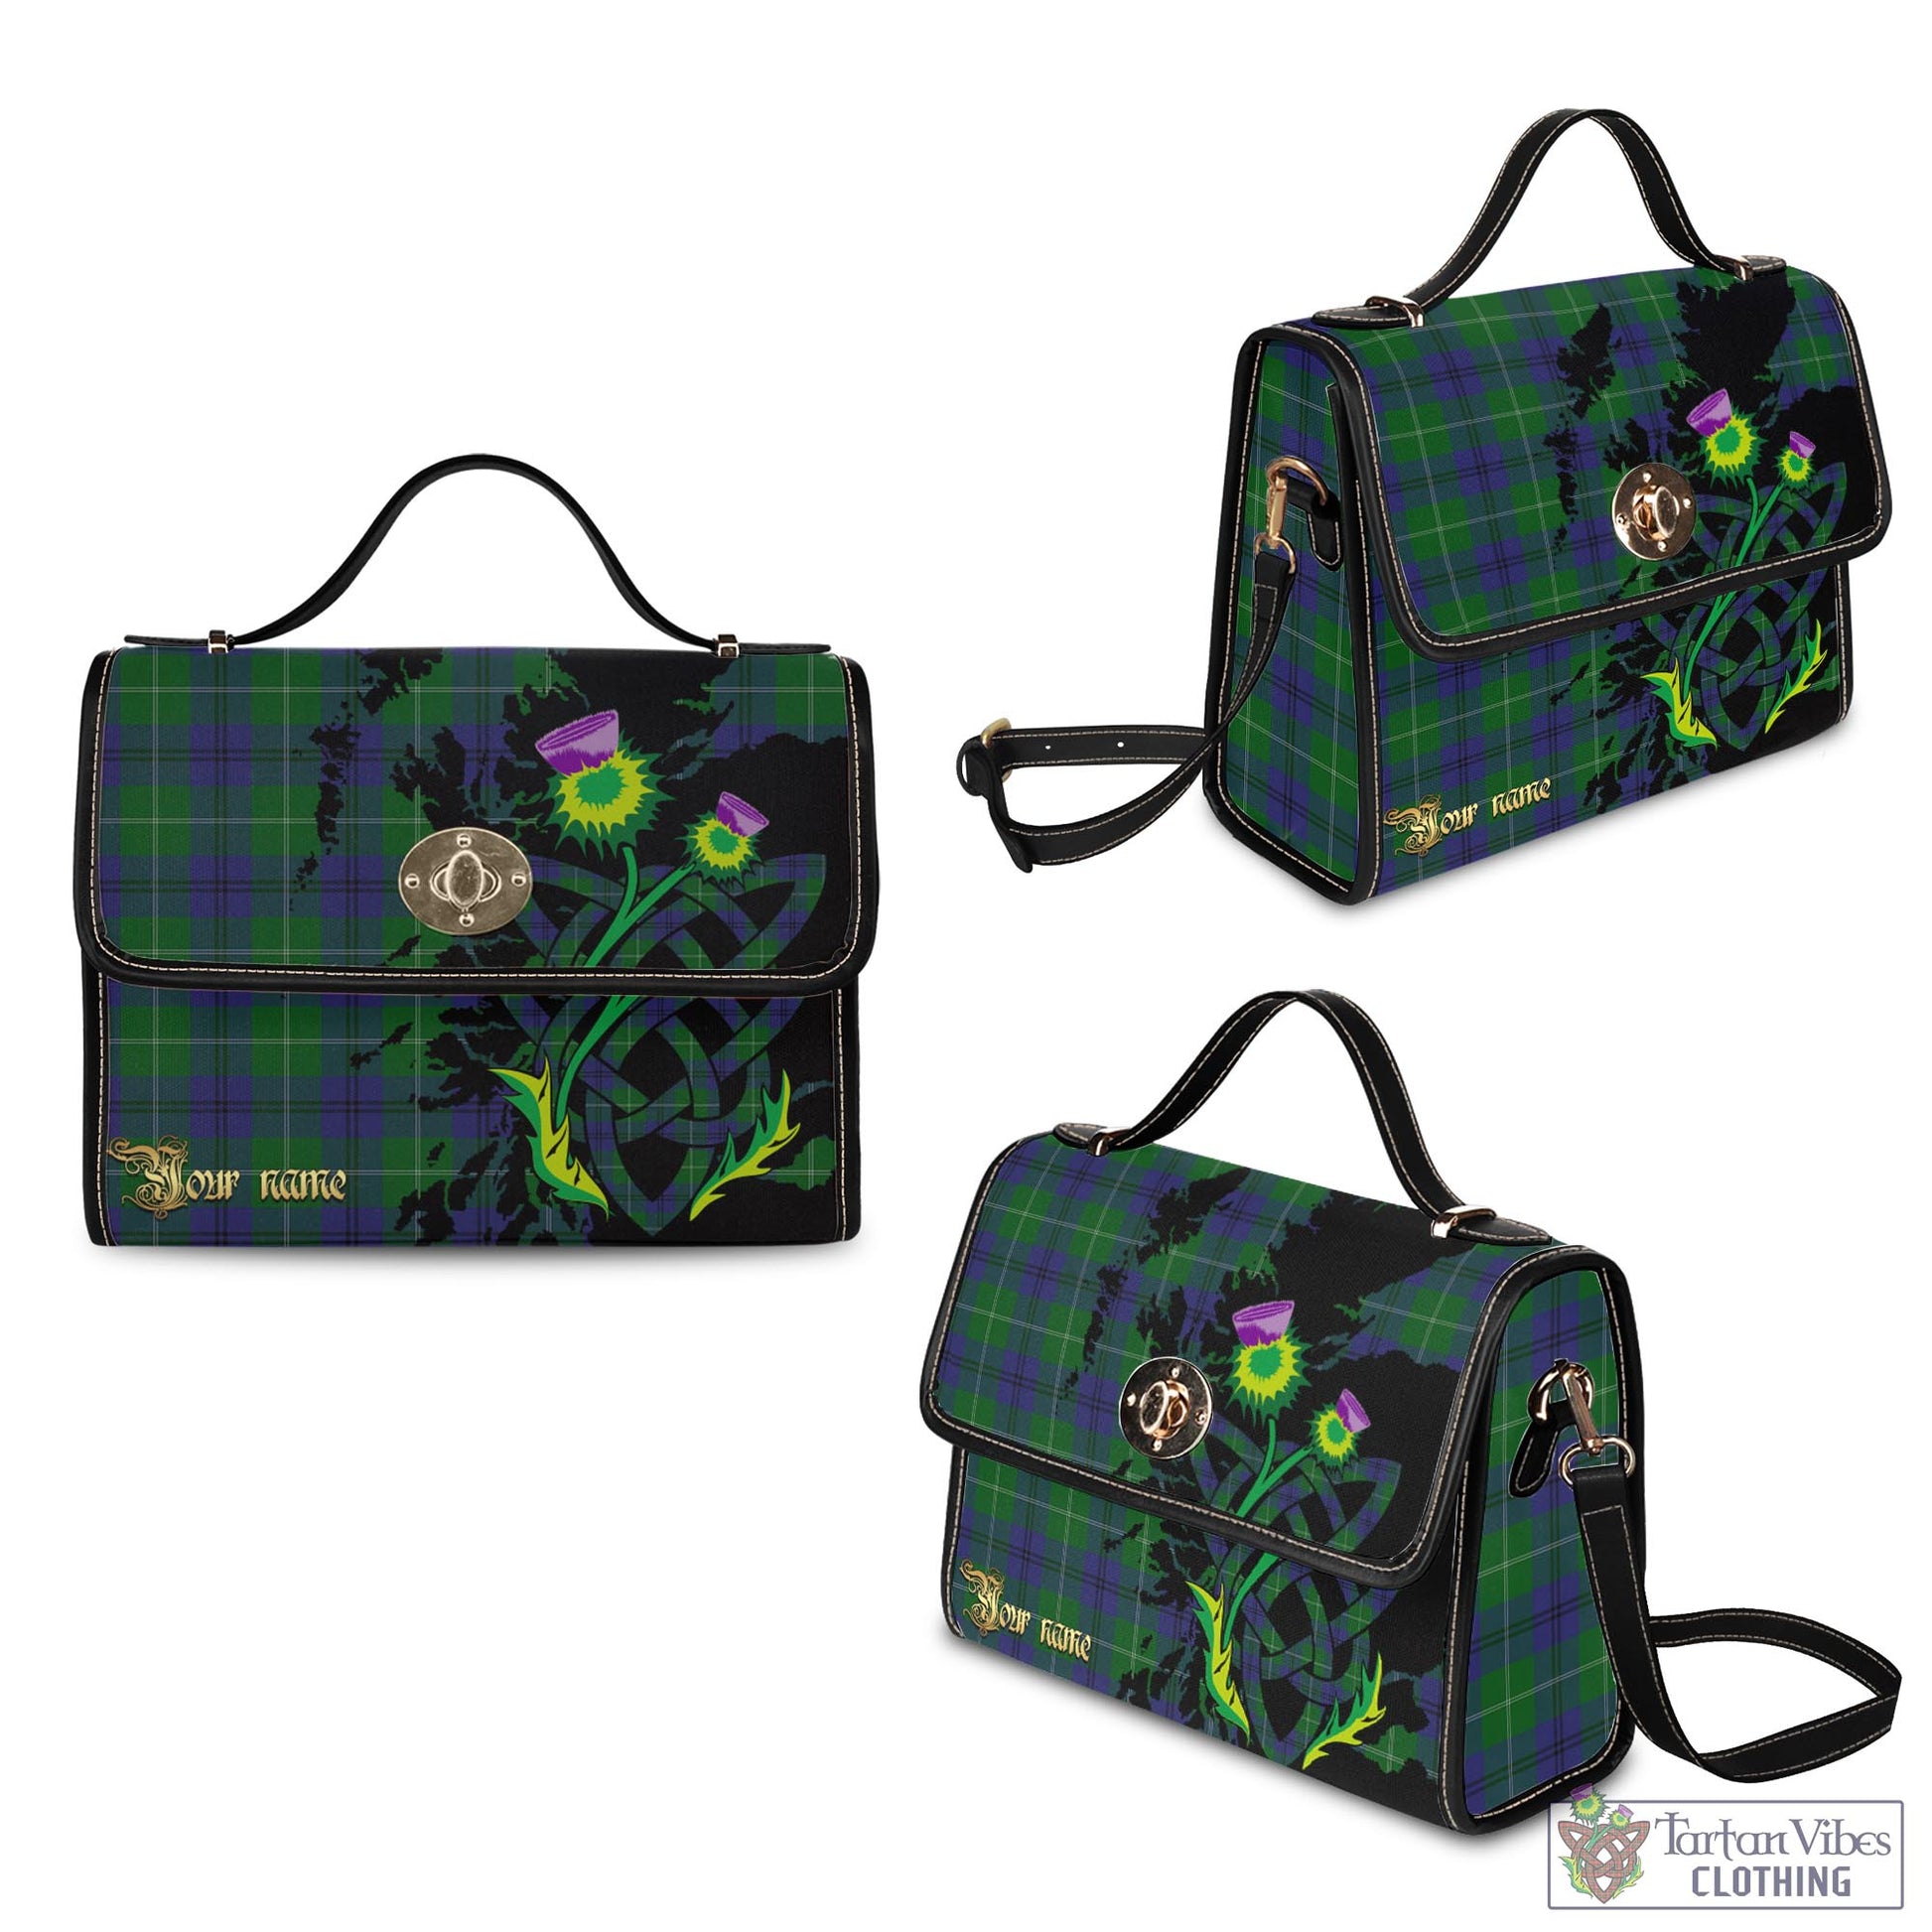 Tartan Vibes Clothing Oliphant Tartan Waterproof Canvas Bag with Scotland Map and Thistle Celtic Accents